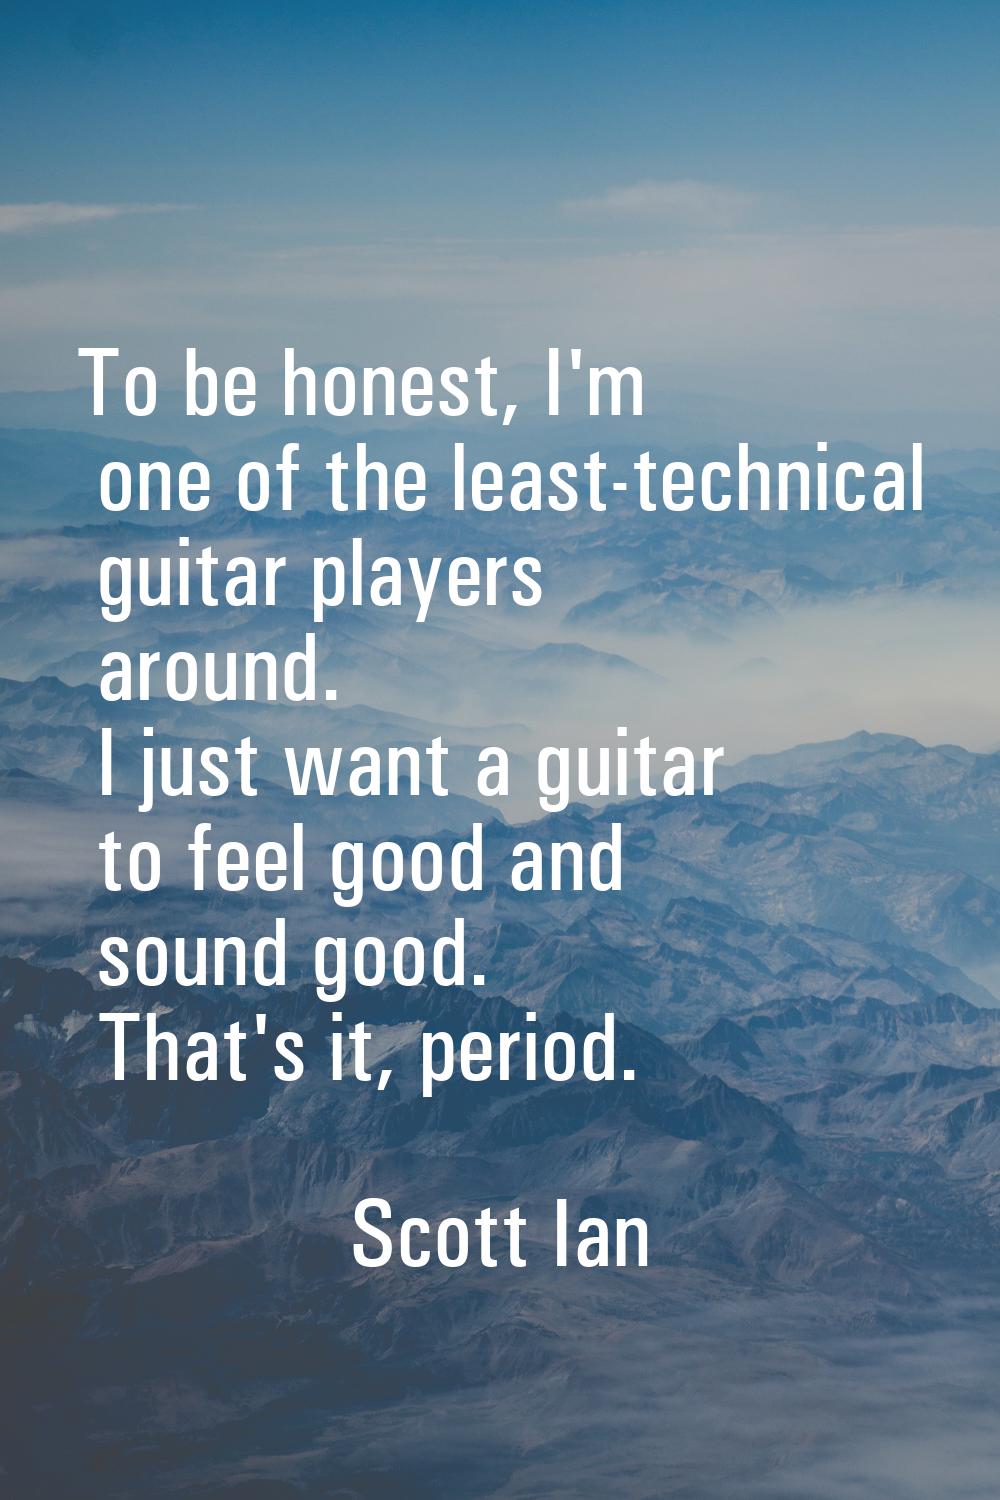 To be honest, I'm one of the least-technical guitar players around. I just want a guitar to feel go